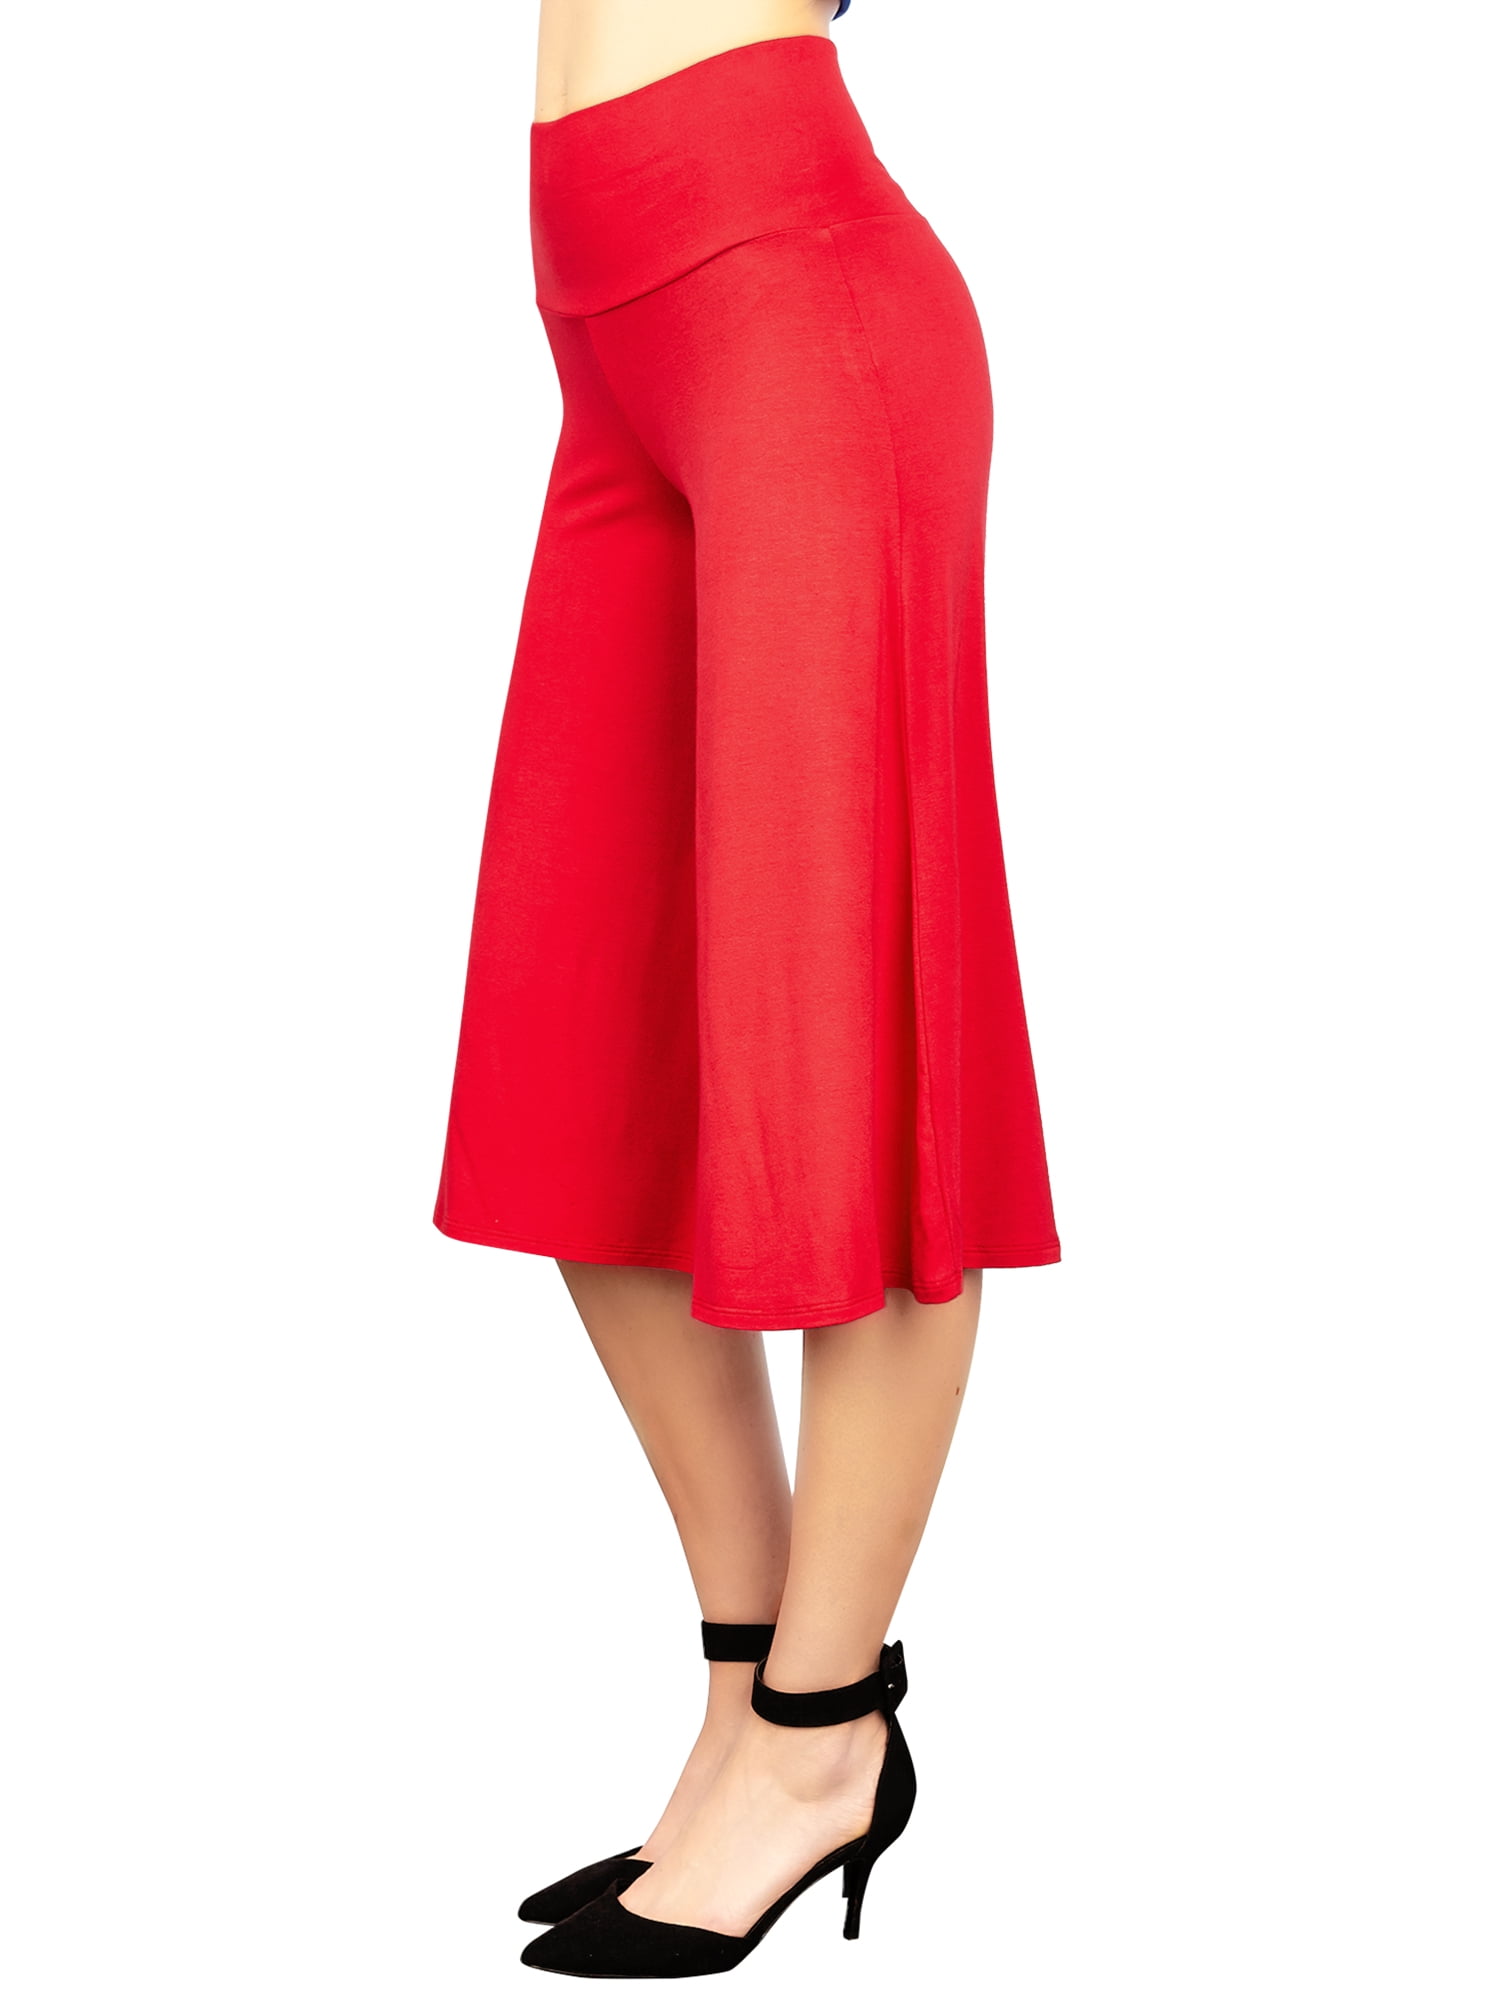 Made by Women\'s RED L Culottes Pants Knit Johnny